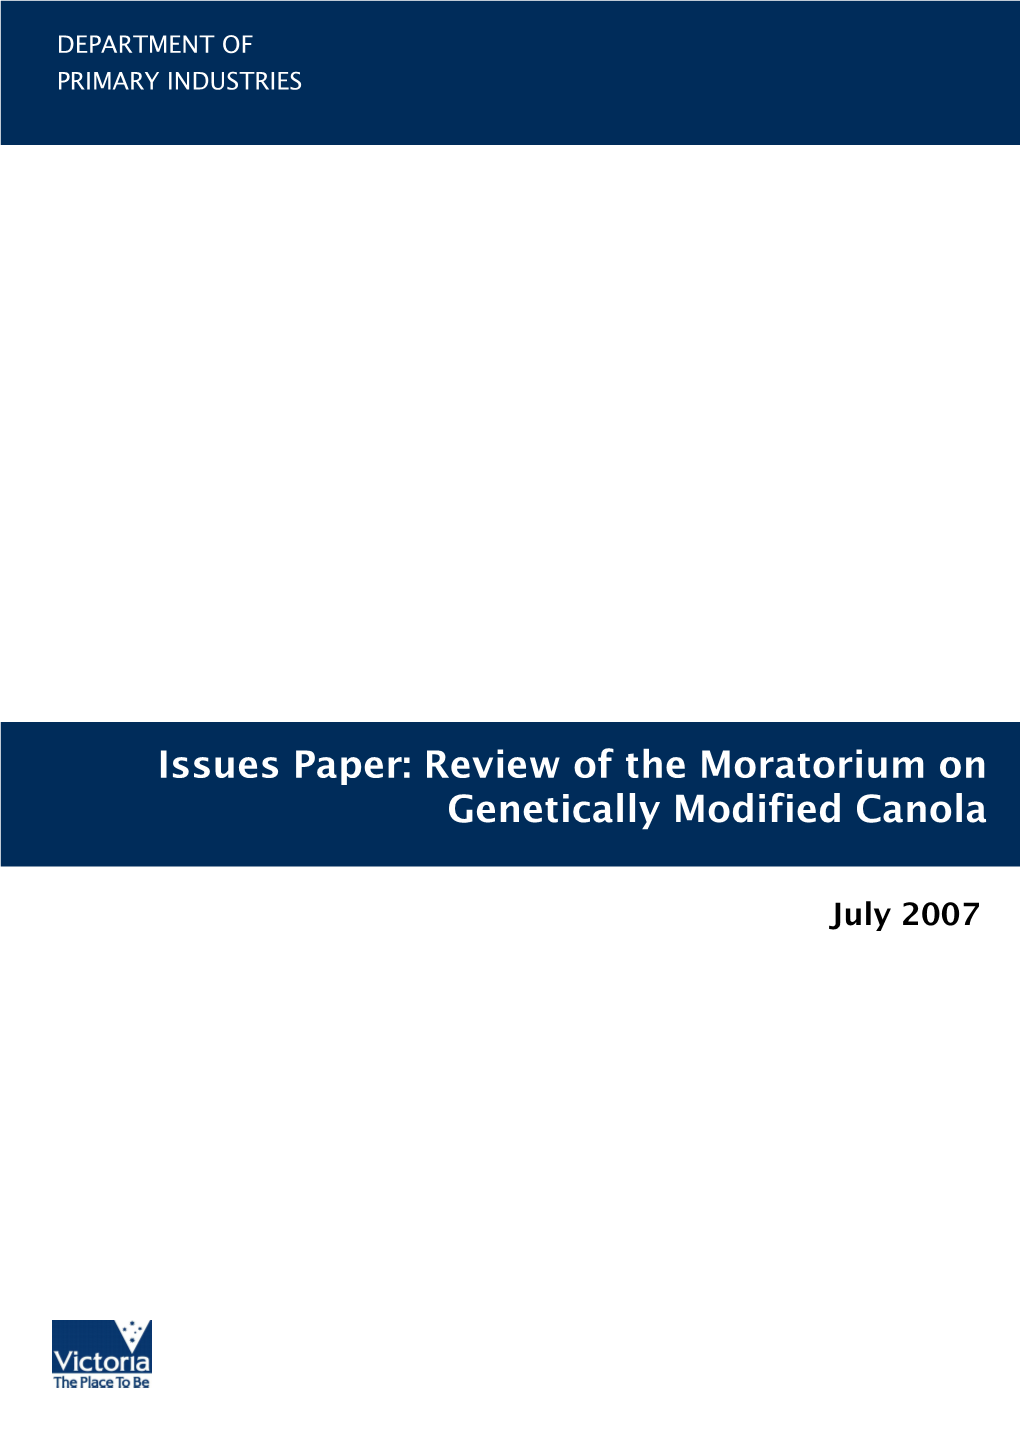 Review of the Moratorium on Genetically Modified Canola